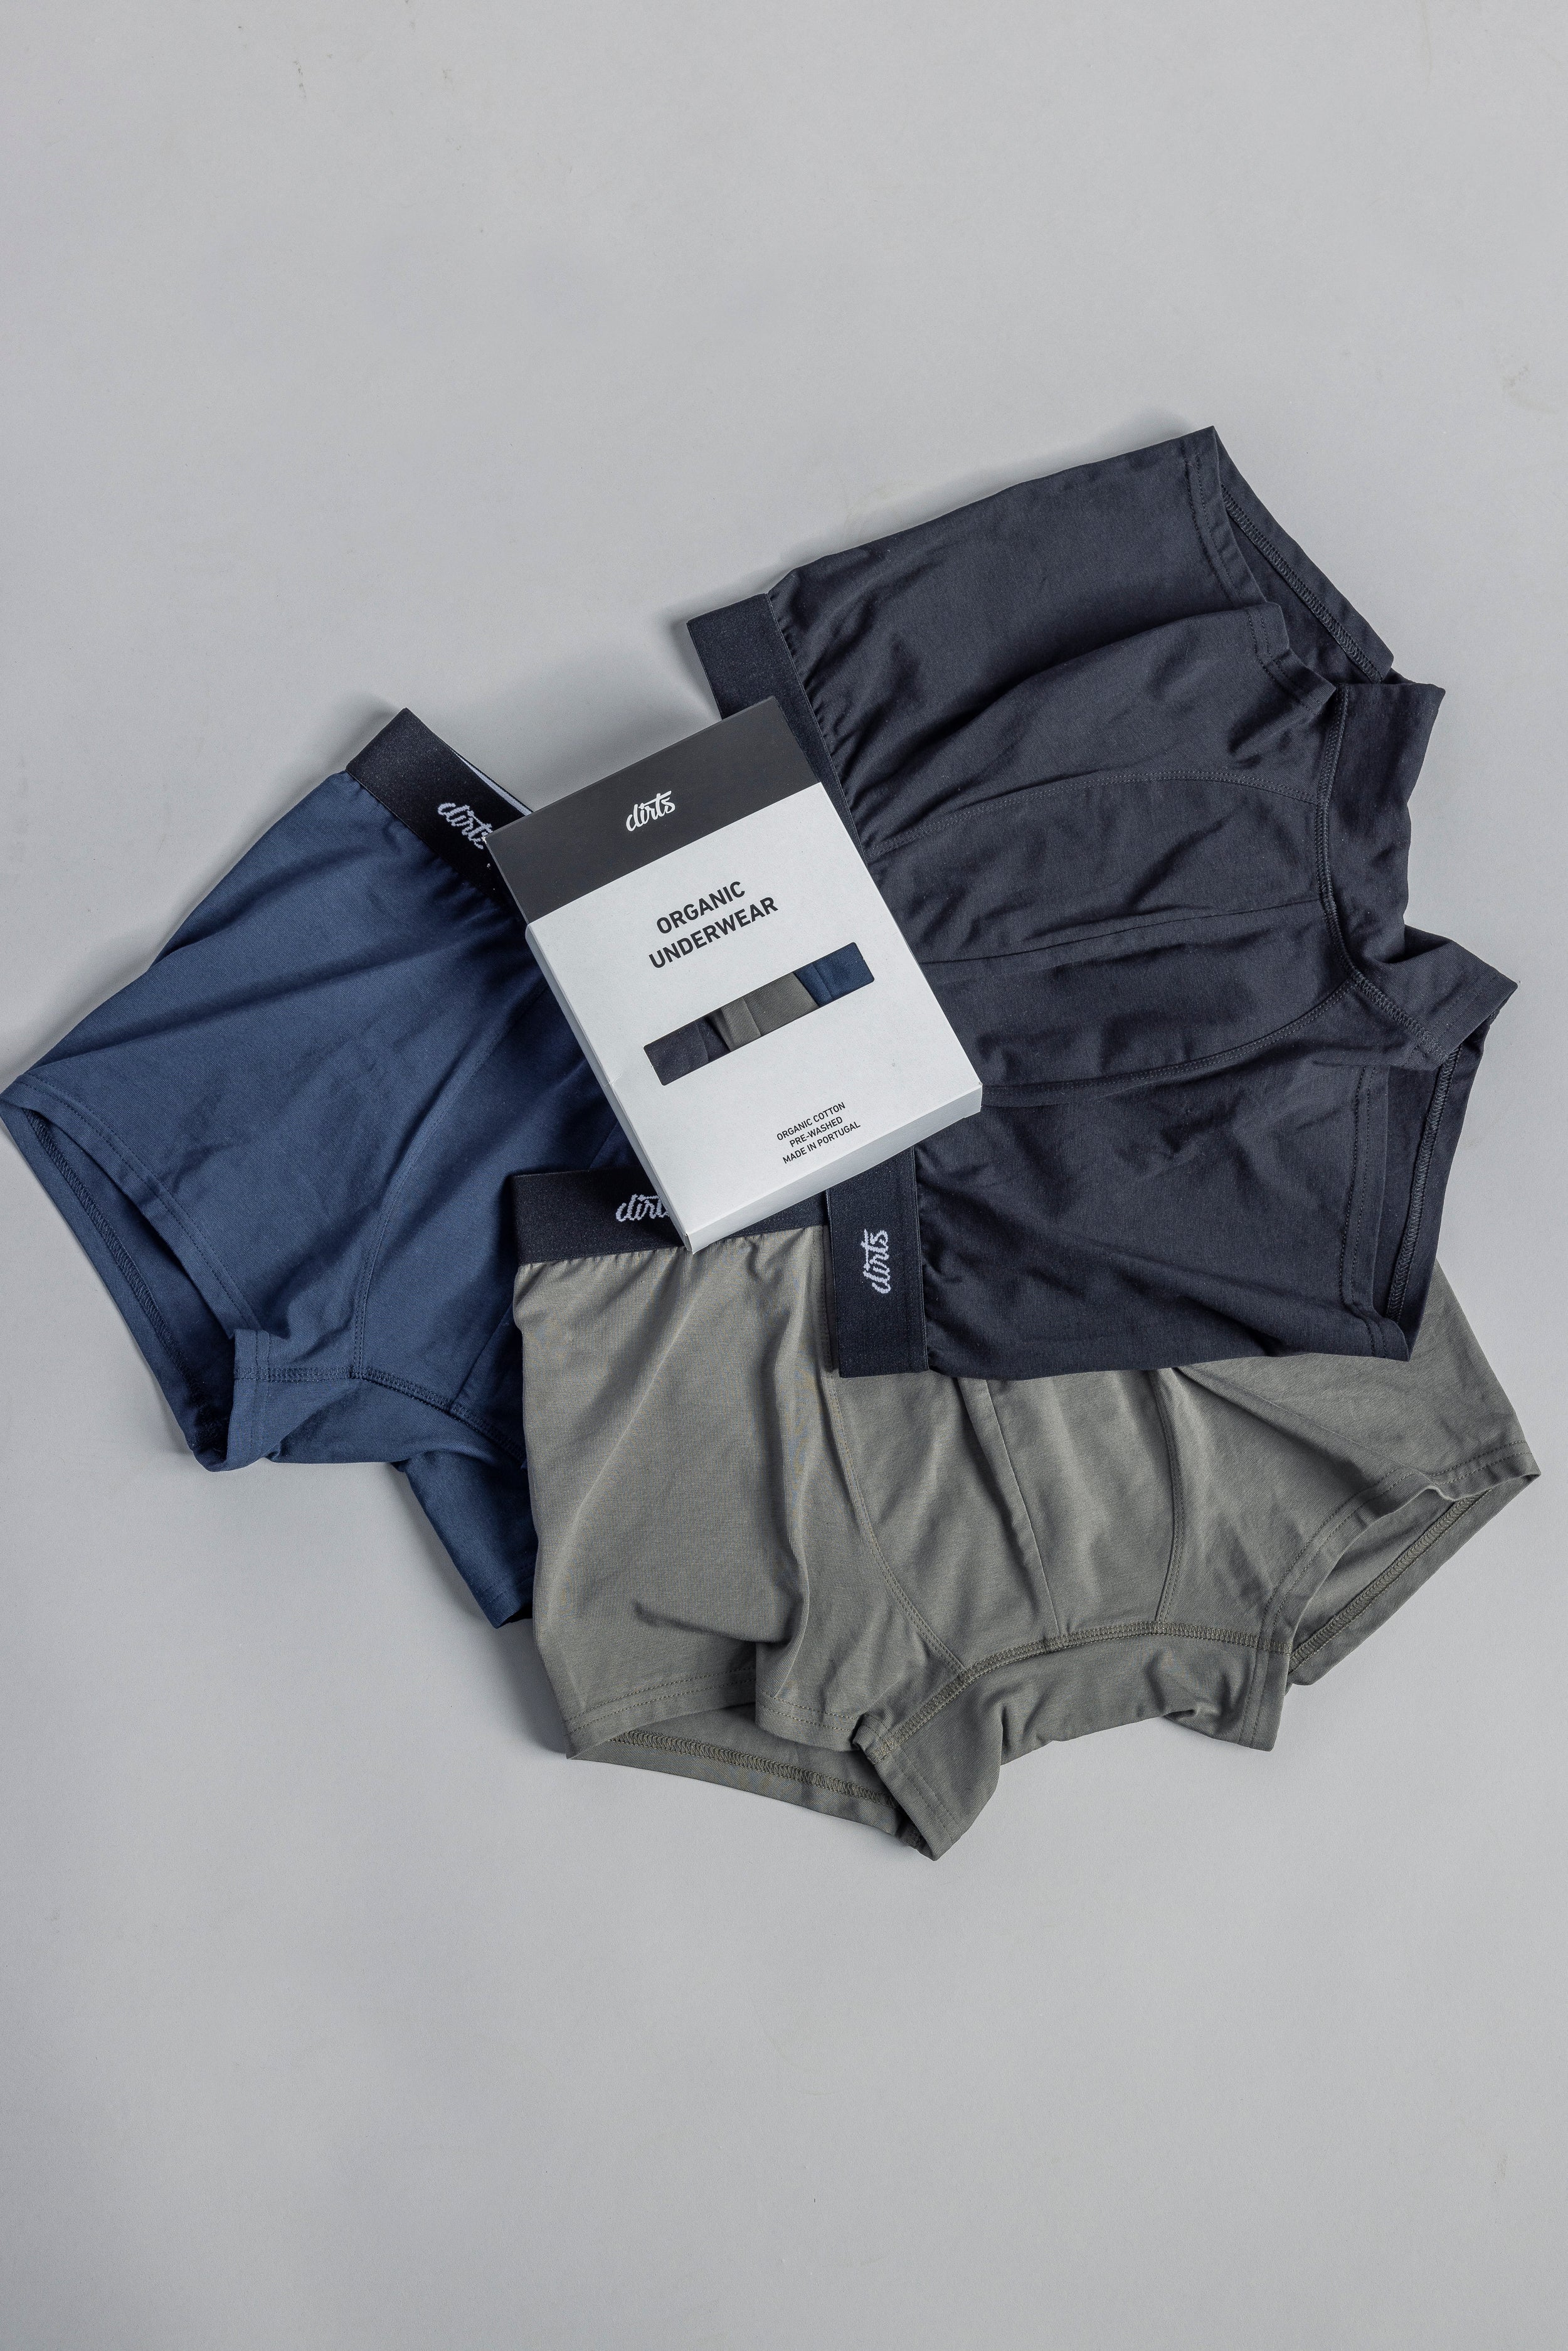 Boxer shorts 3-pack made of organic cotton from DIRTS